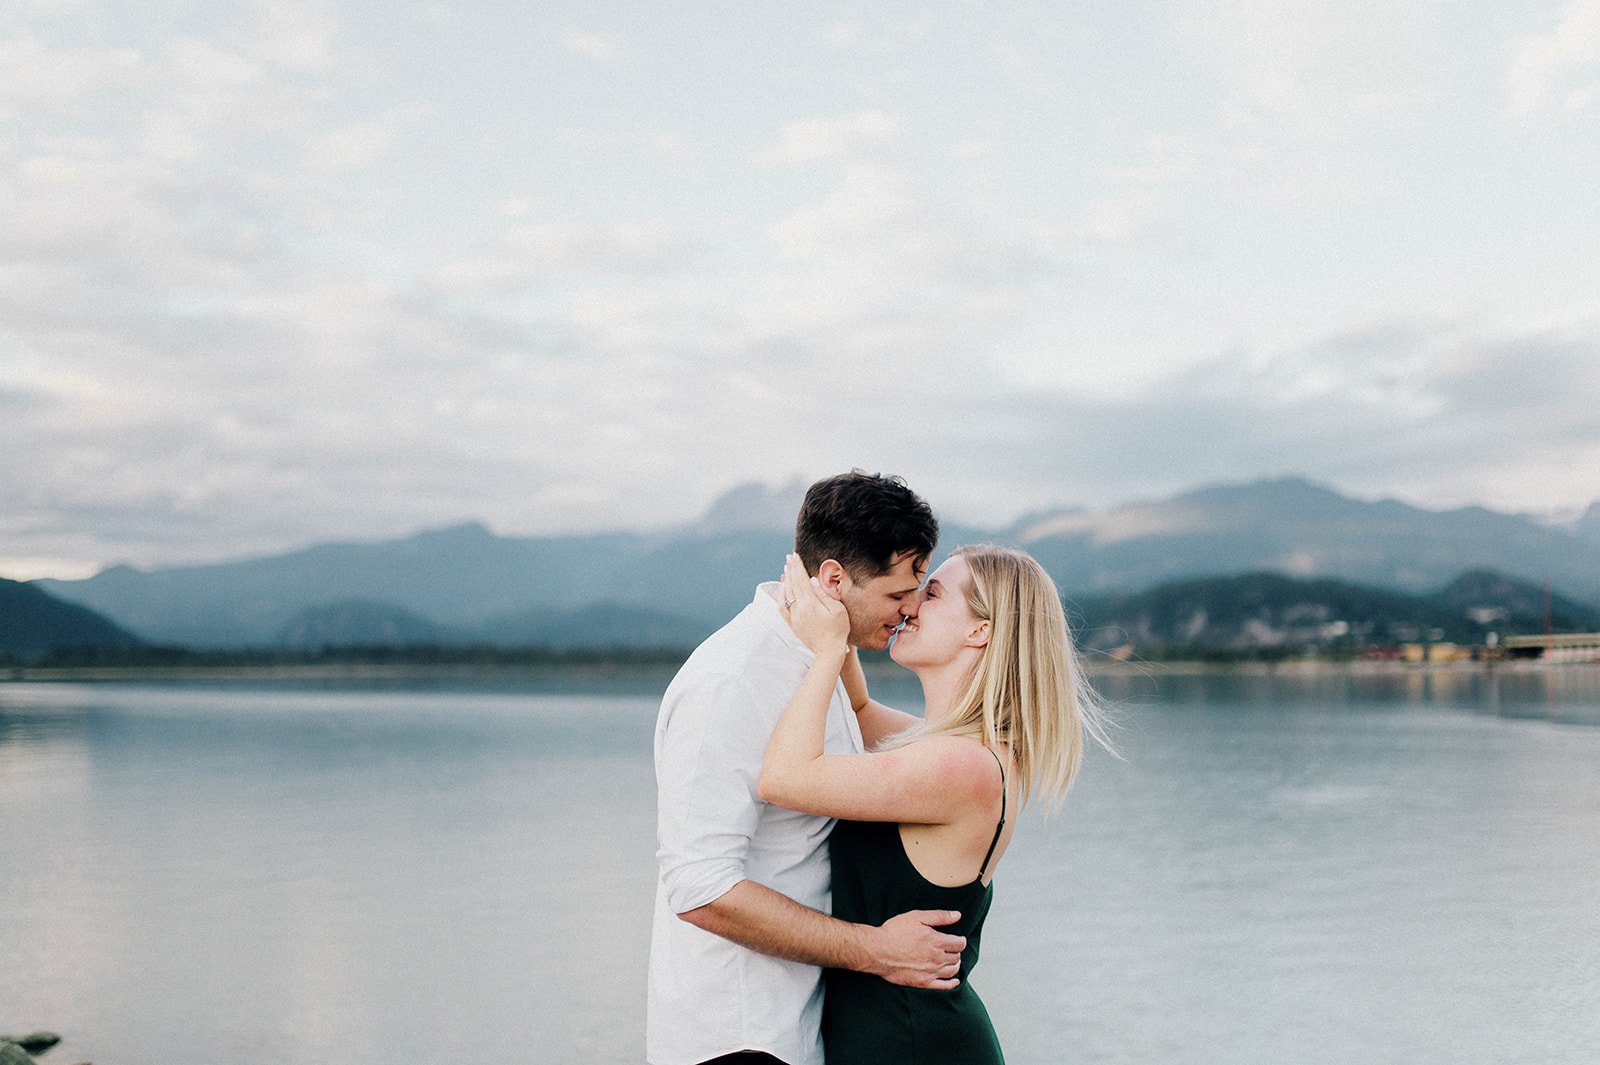 A man and woman share a kiss in front of a scenic lake surrounded by mountains in Squamish, BC   